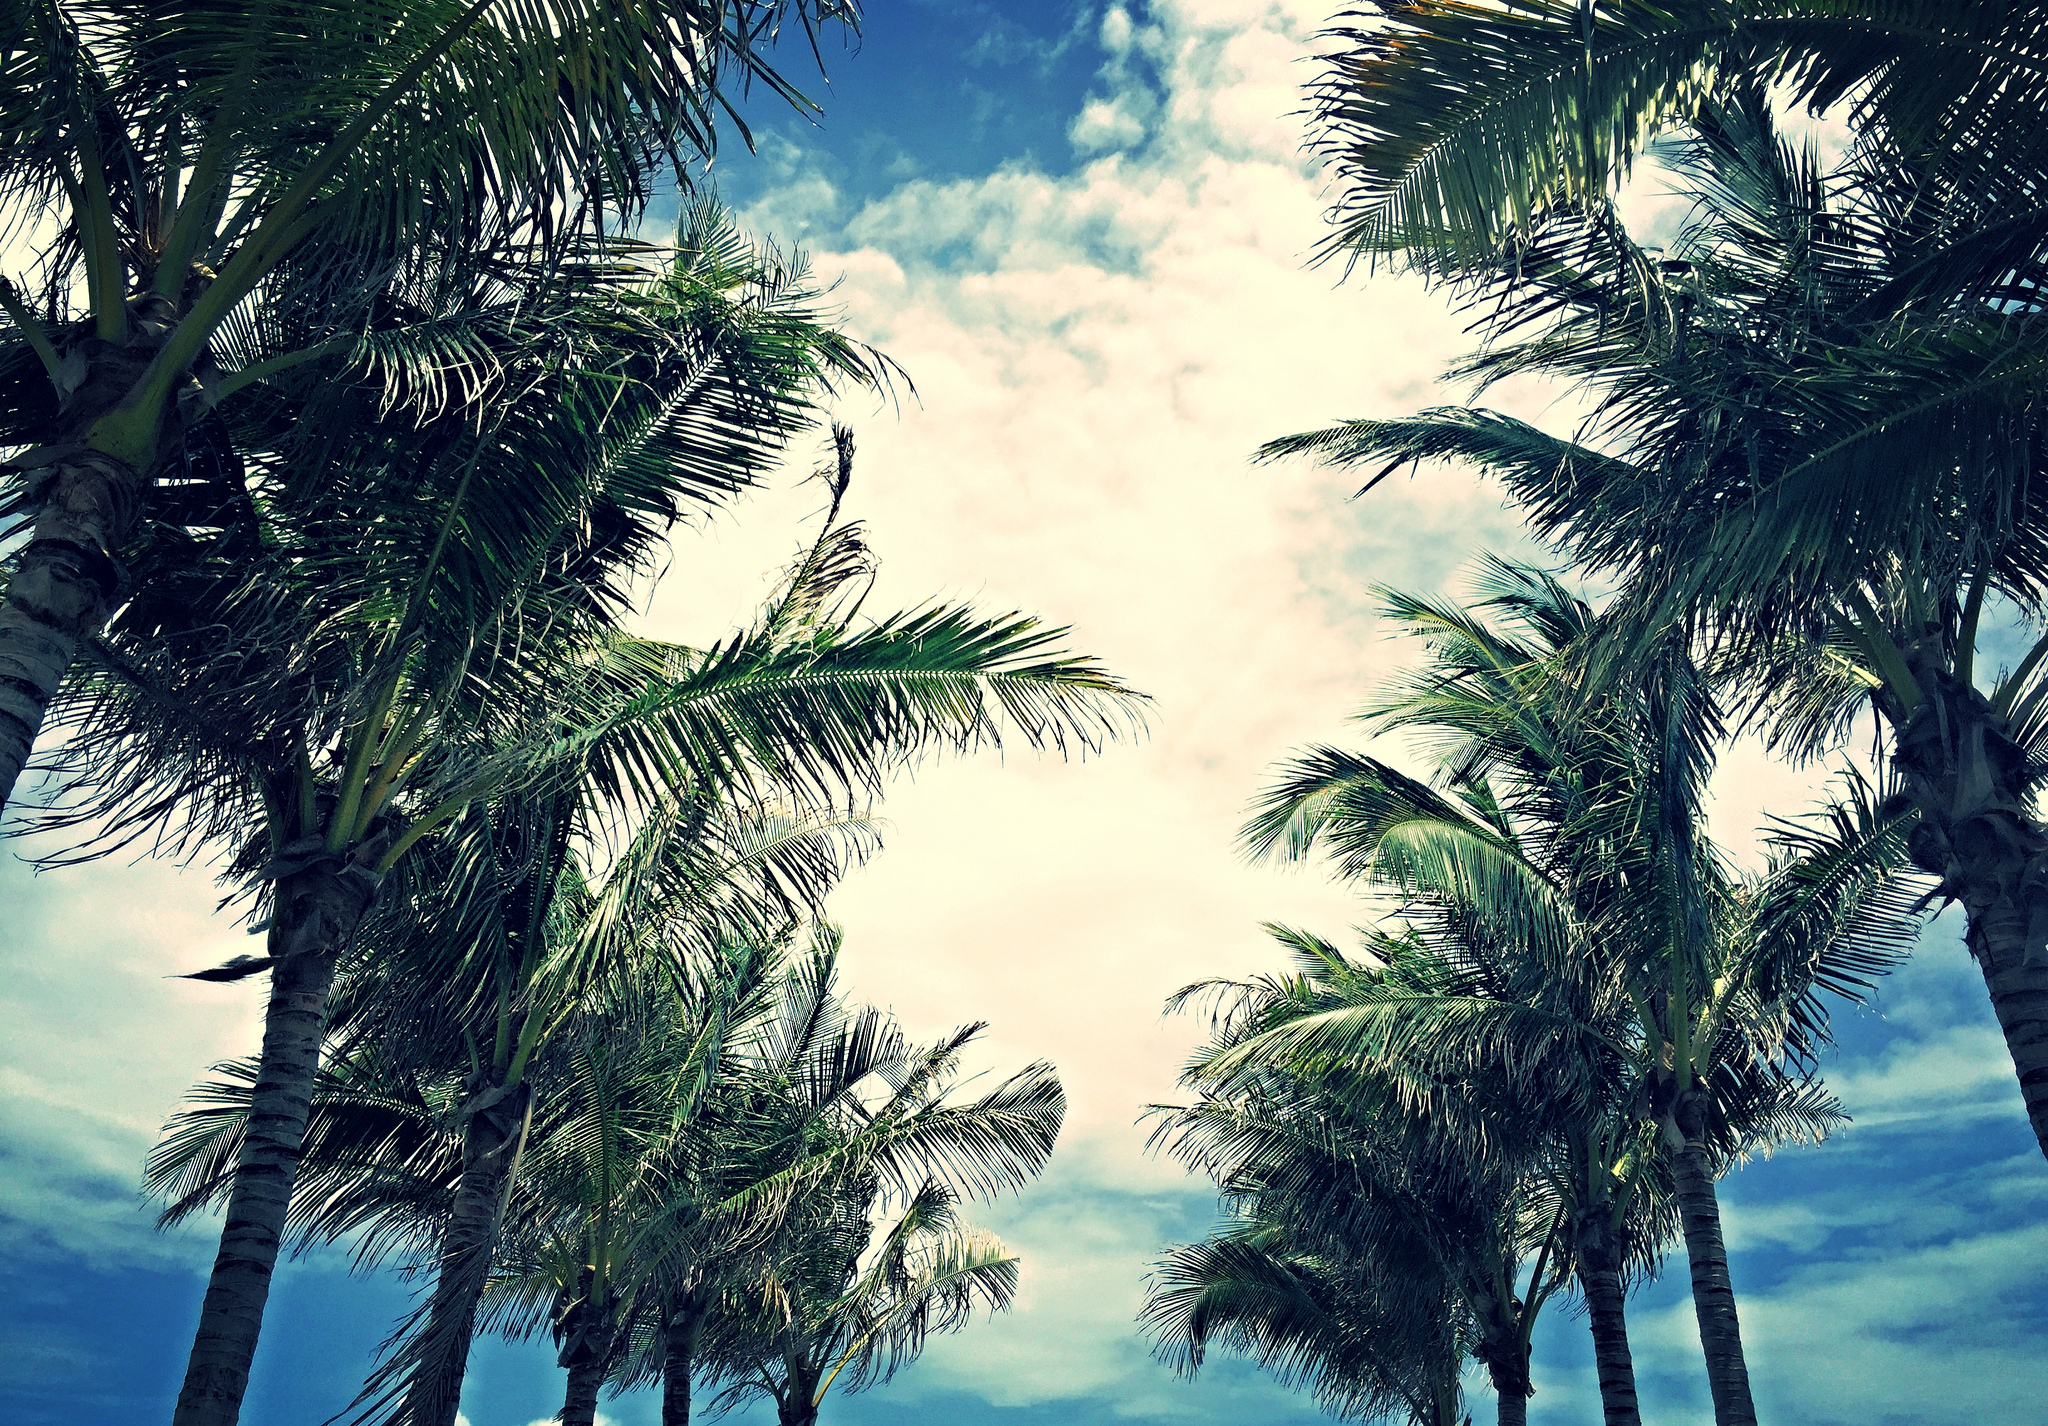 misconceptions of trusts - the tops of palm trees against the sky